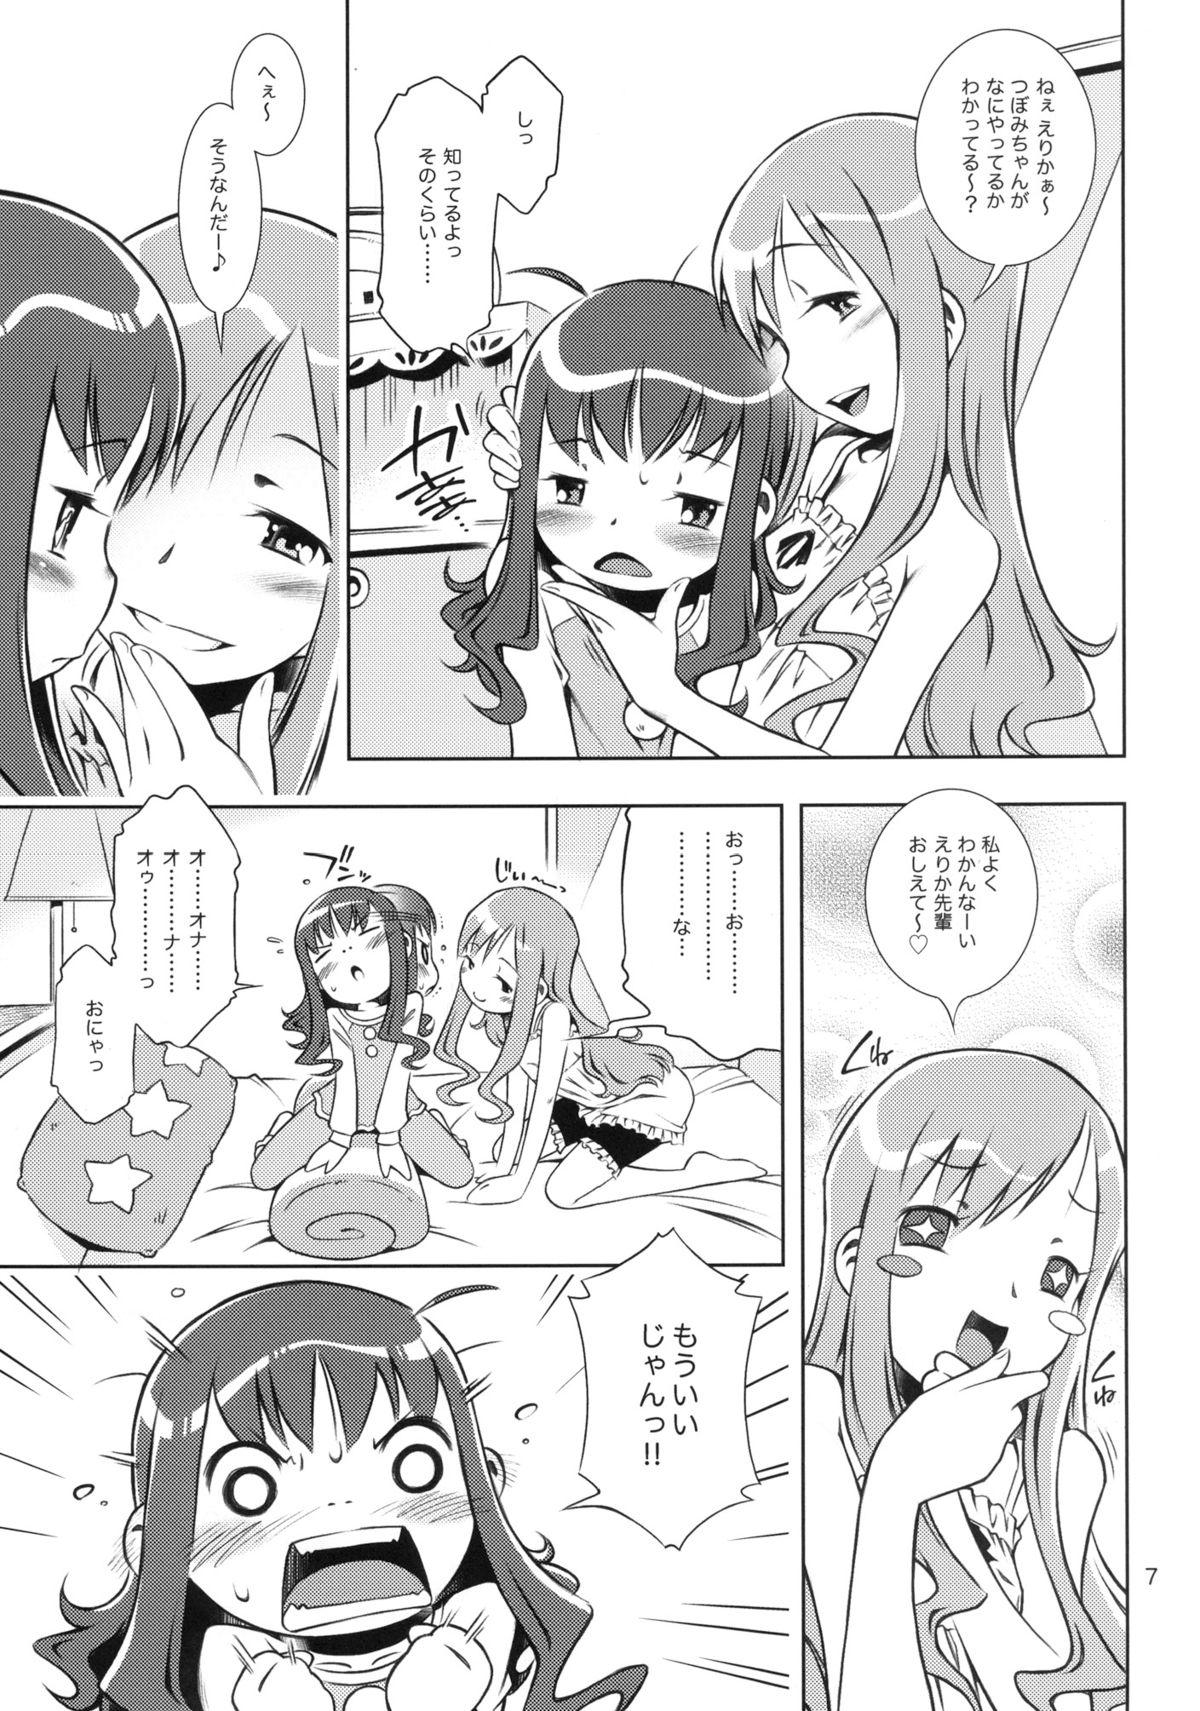 Sexy Girl Girl in marine blue * - Heartcatch precure Foreskin - Page 7